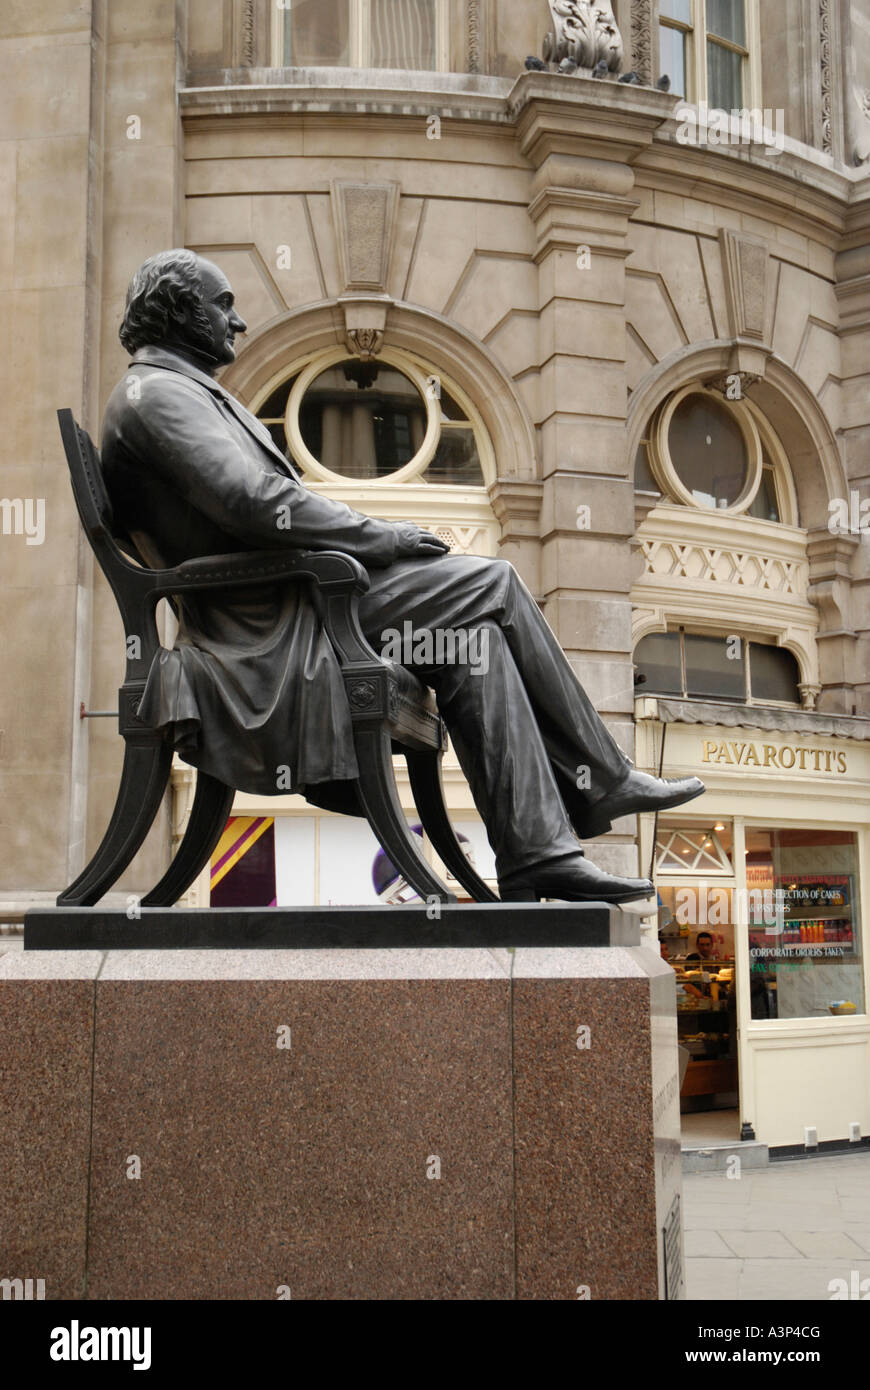 Statue of George Peabody next to the Royal Exchange in the City of London England Stock Photo